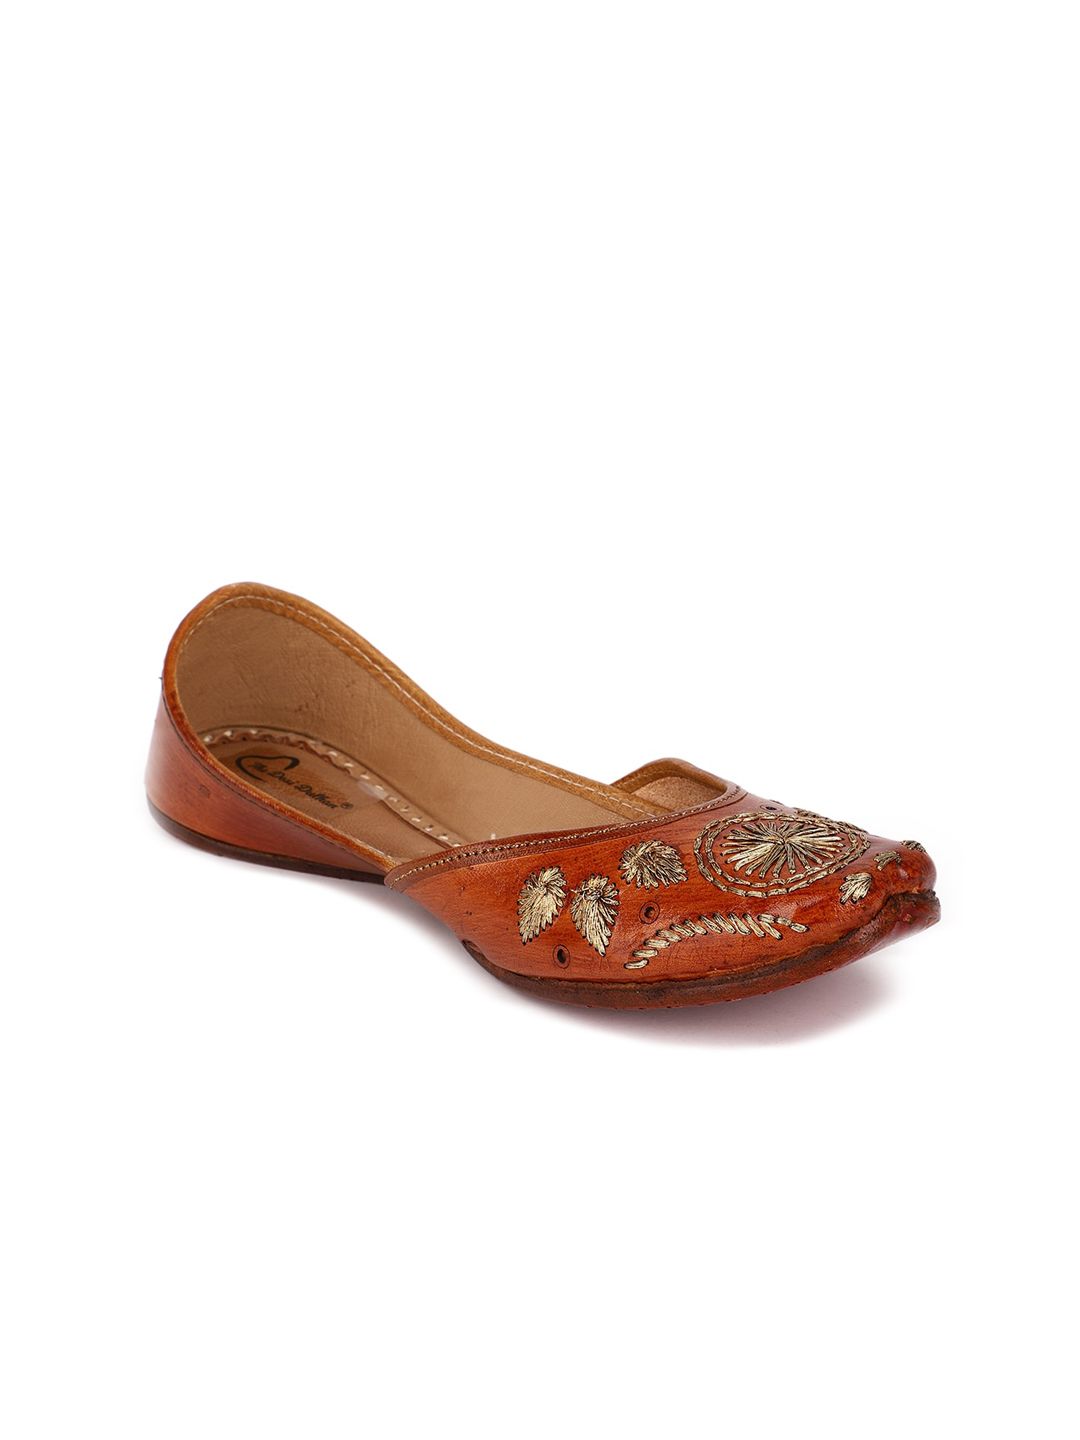 The Desi Dulhan Women Brown Embellished Ethnic Ballerinas Flats Price in India